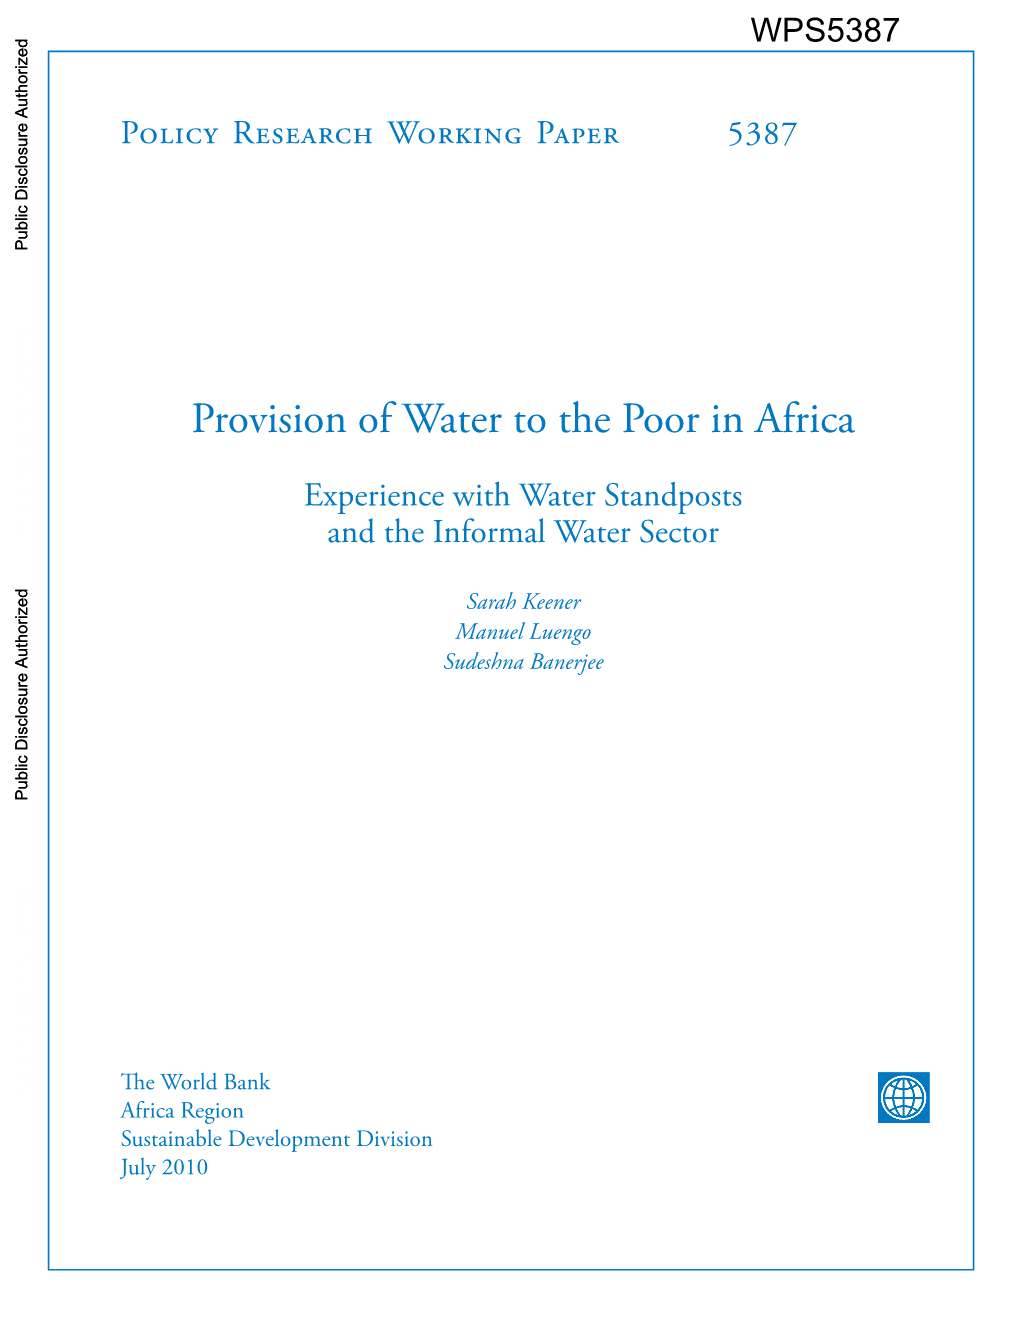 Provision of Water to the Poor in Africa